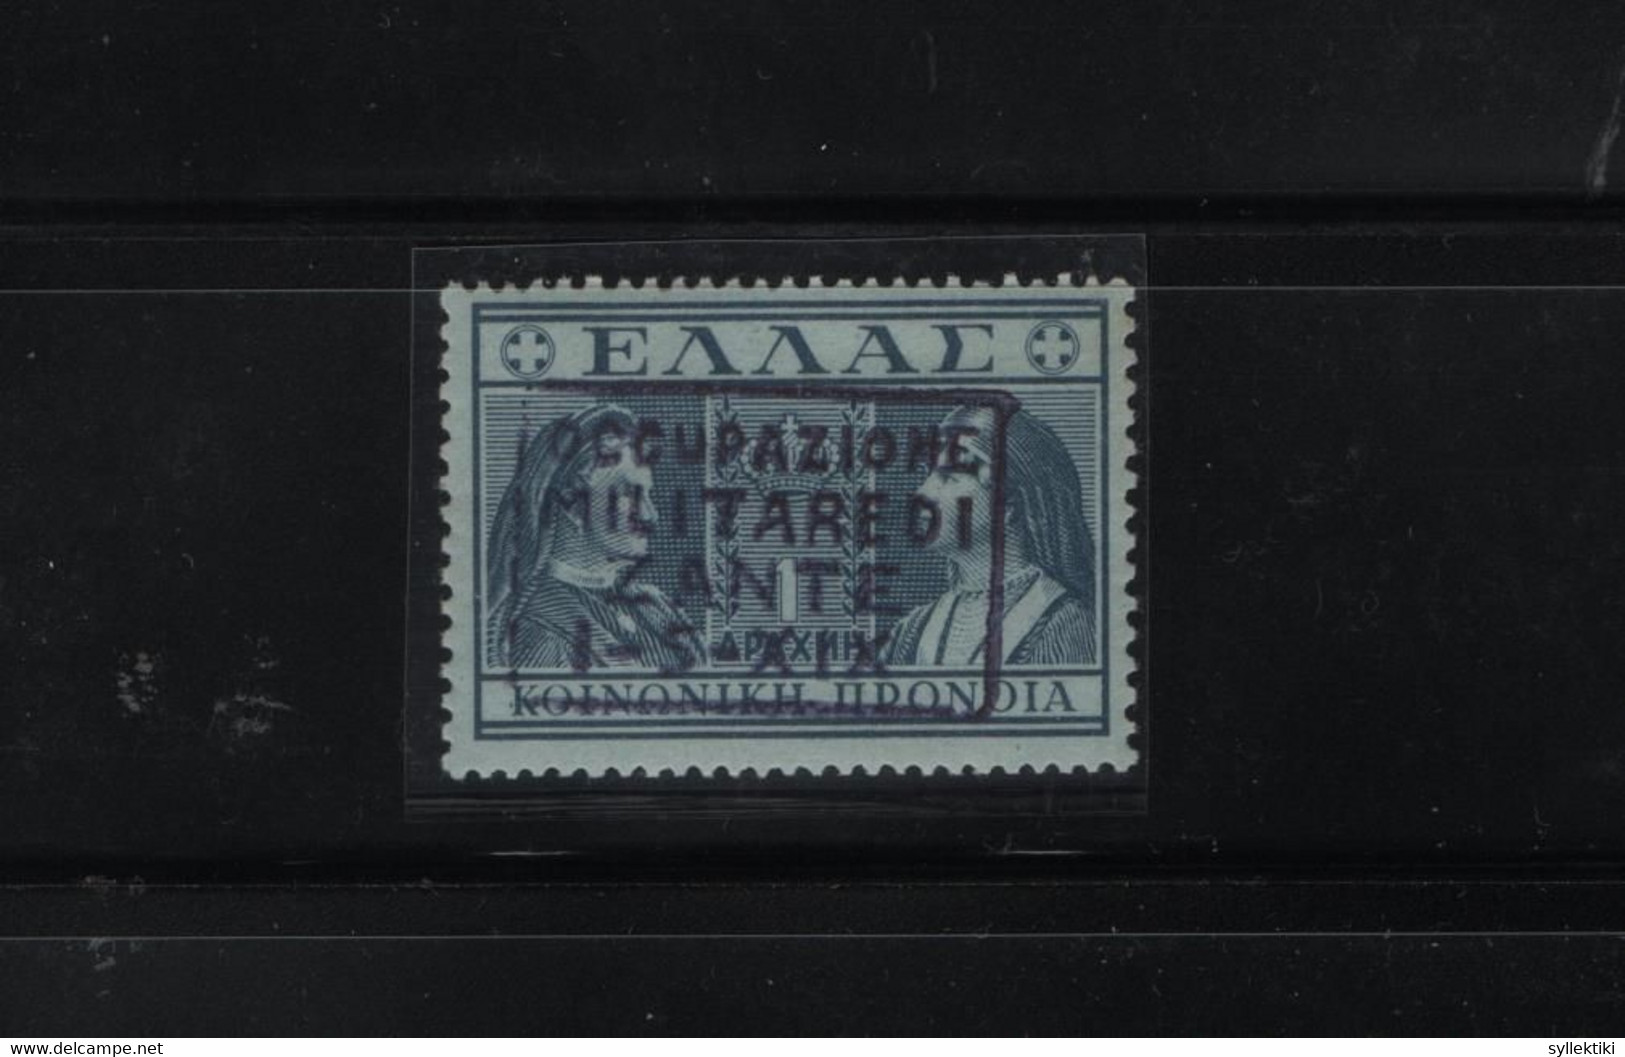 GREECE 1941 ZANTE OVERPRINT ON CHARITY ISSUE 1 DRACHMA MNH STAMP     HELLAS No 306 AND VALUE  EURO 900.00++ - Ionian Islands